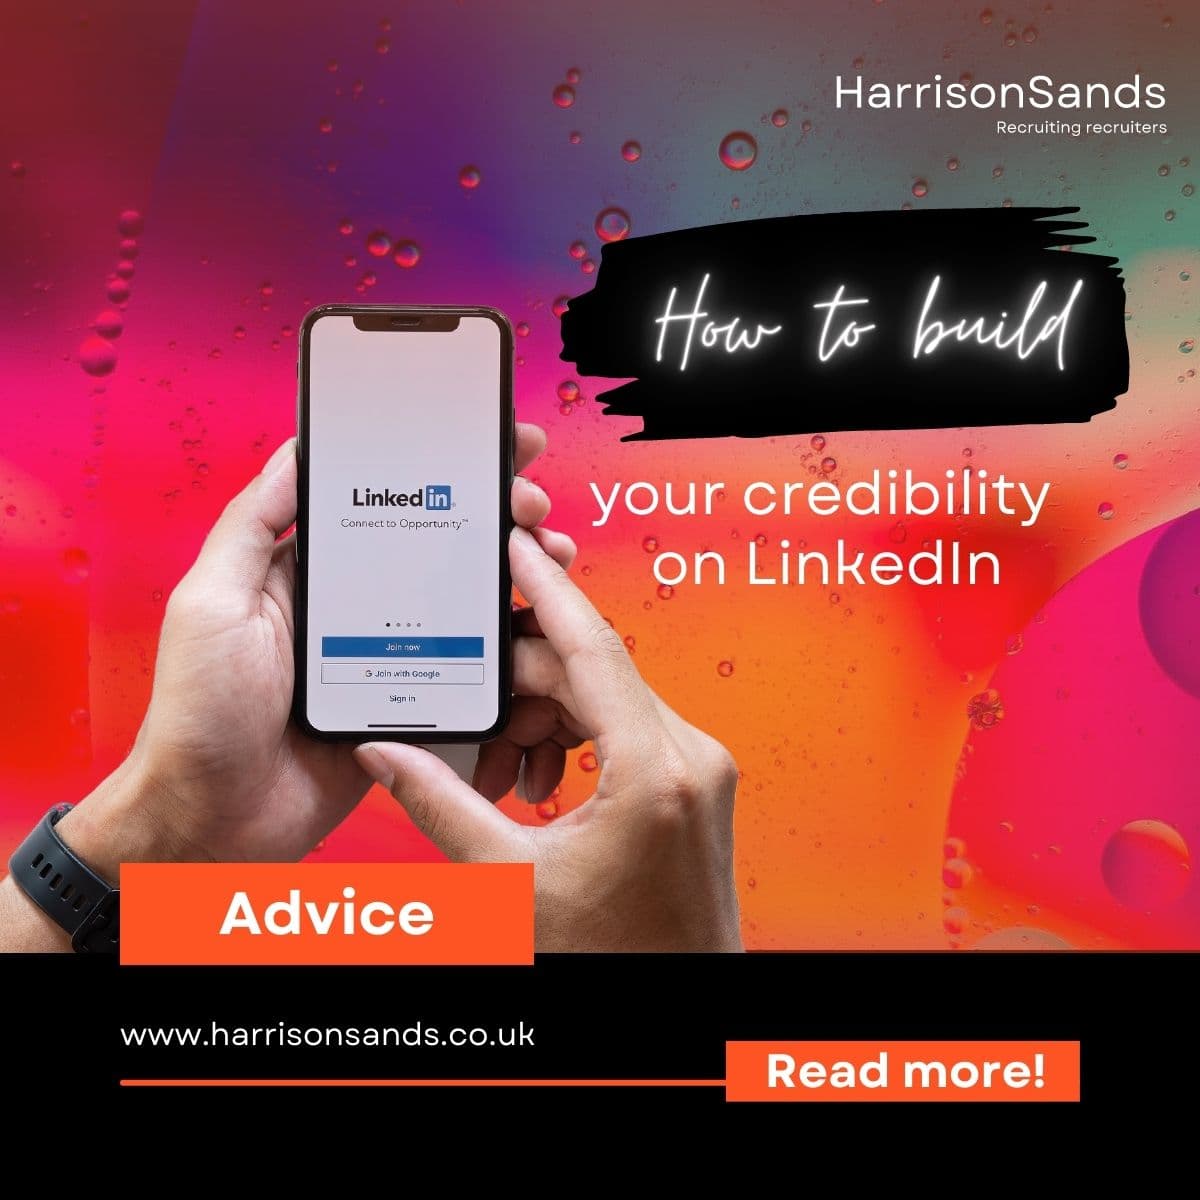 How to build your credibility on LinkedIn